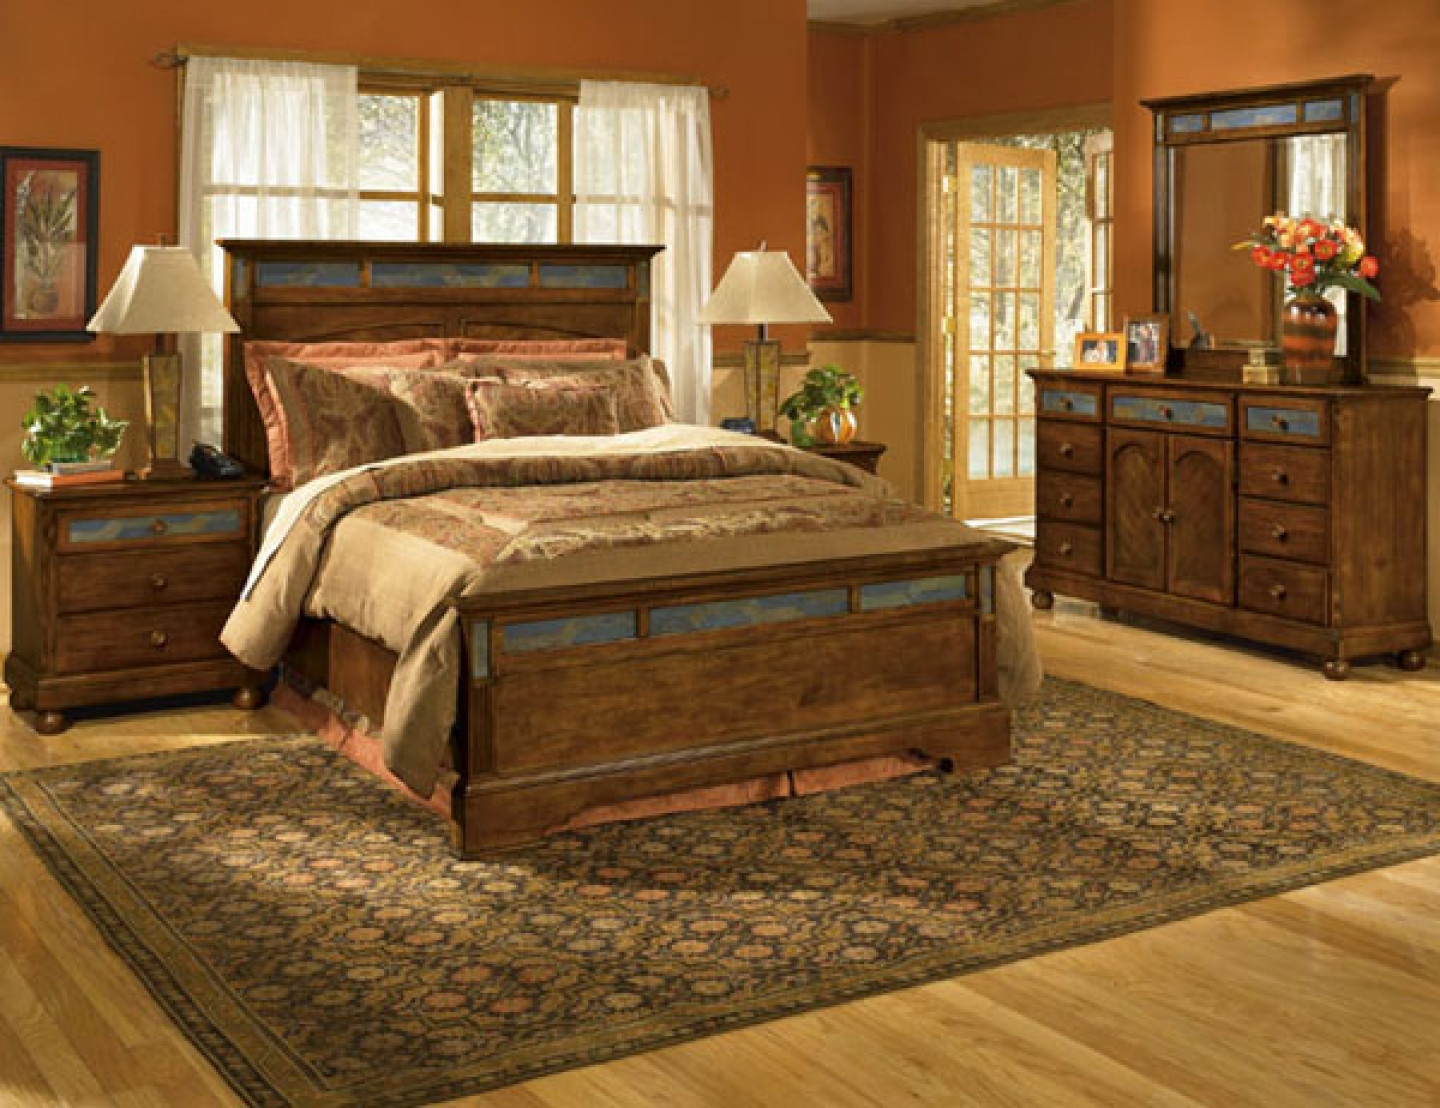 Rustic Style Bedroom
 35 Rustic Bedroom Design For Your Home – The WoW Style